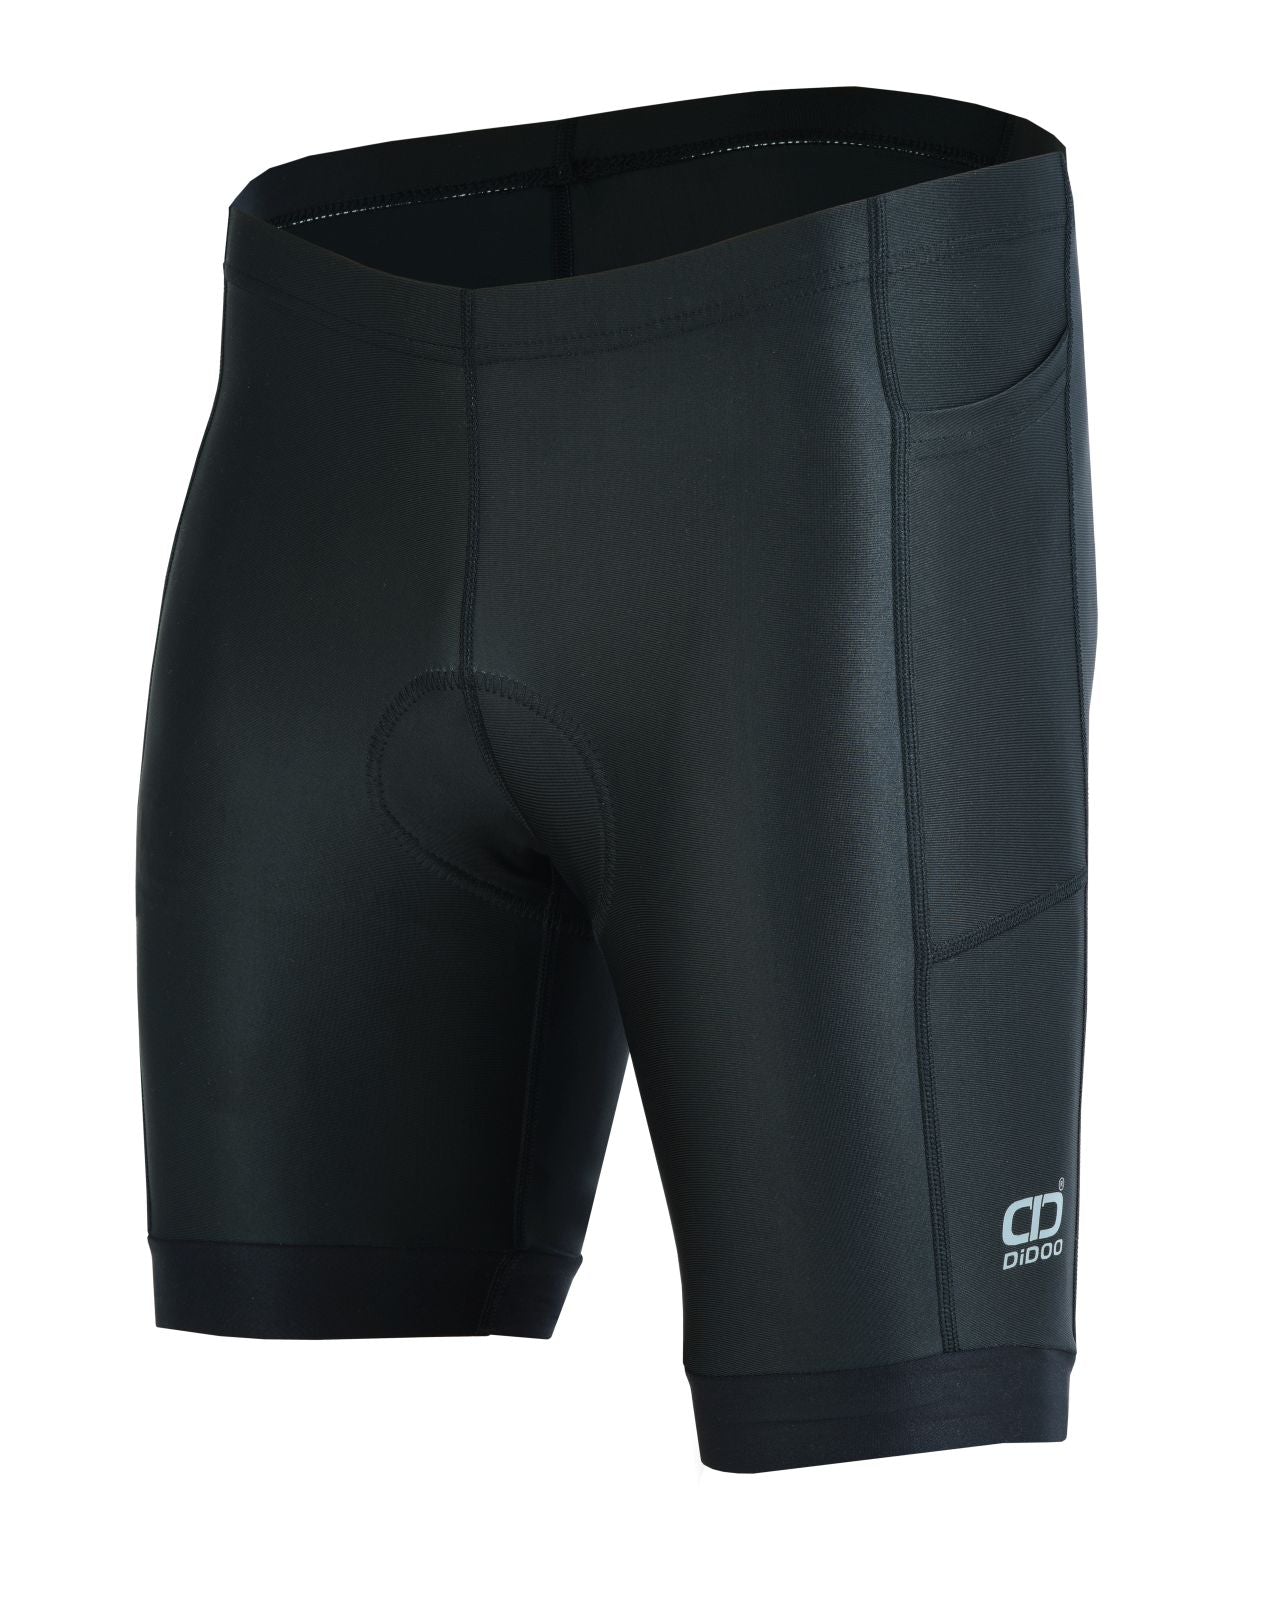 Women Performance Cycling Shorts Black with Pocket